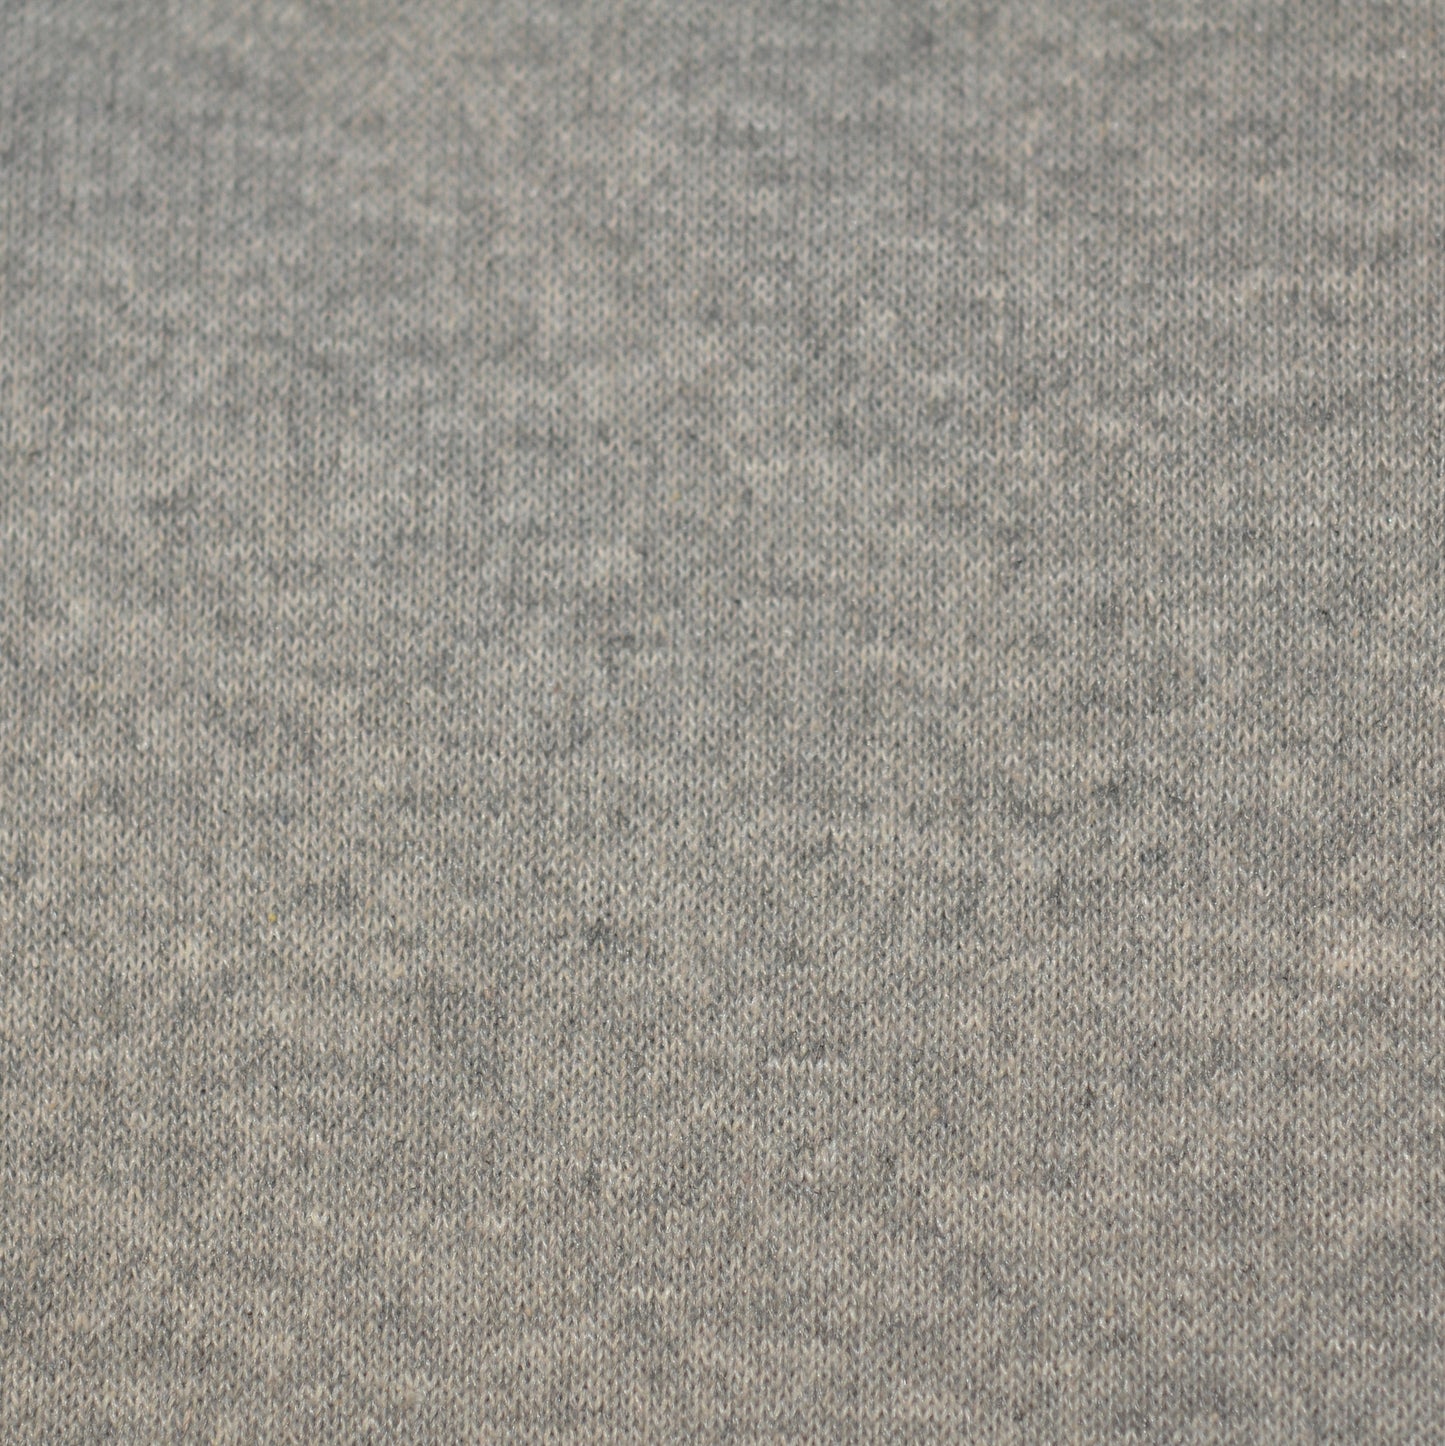 55% Repreve Post Consumer Recycled Polyester, 45% Pre Consumer Recycled Cotton Diagonal Fleece - Grey Melange (2FT309)